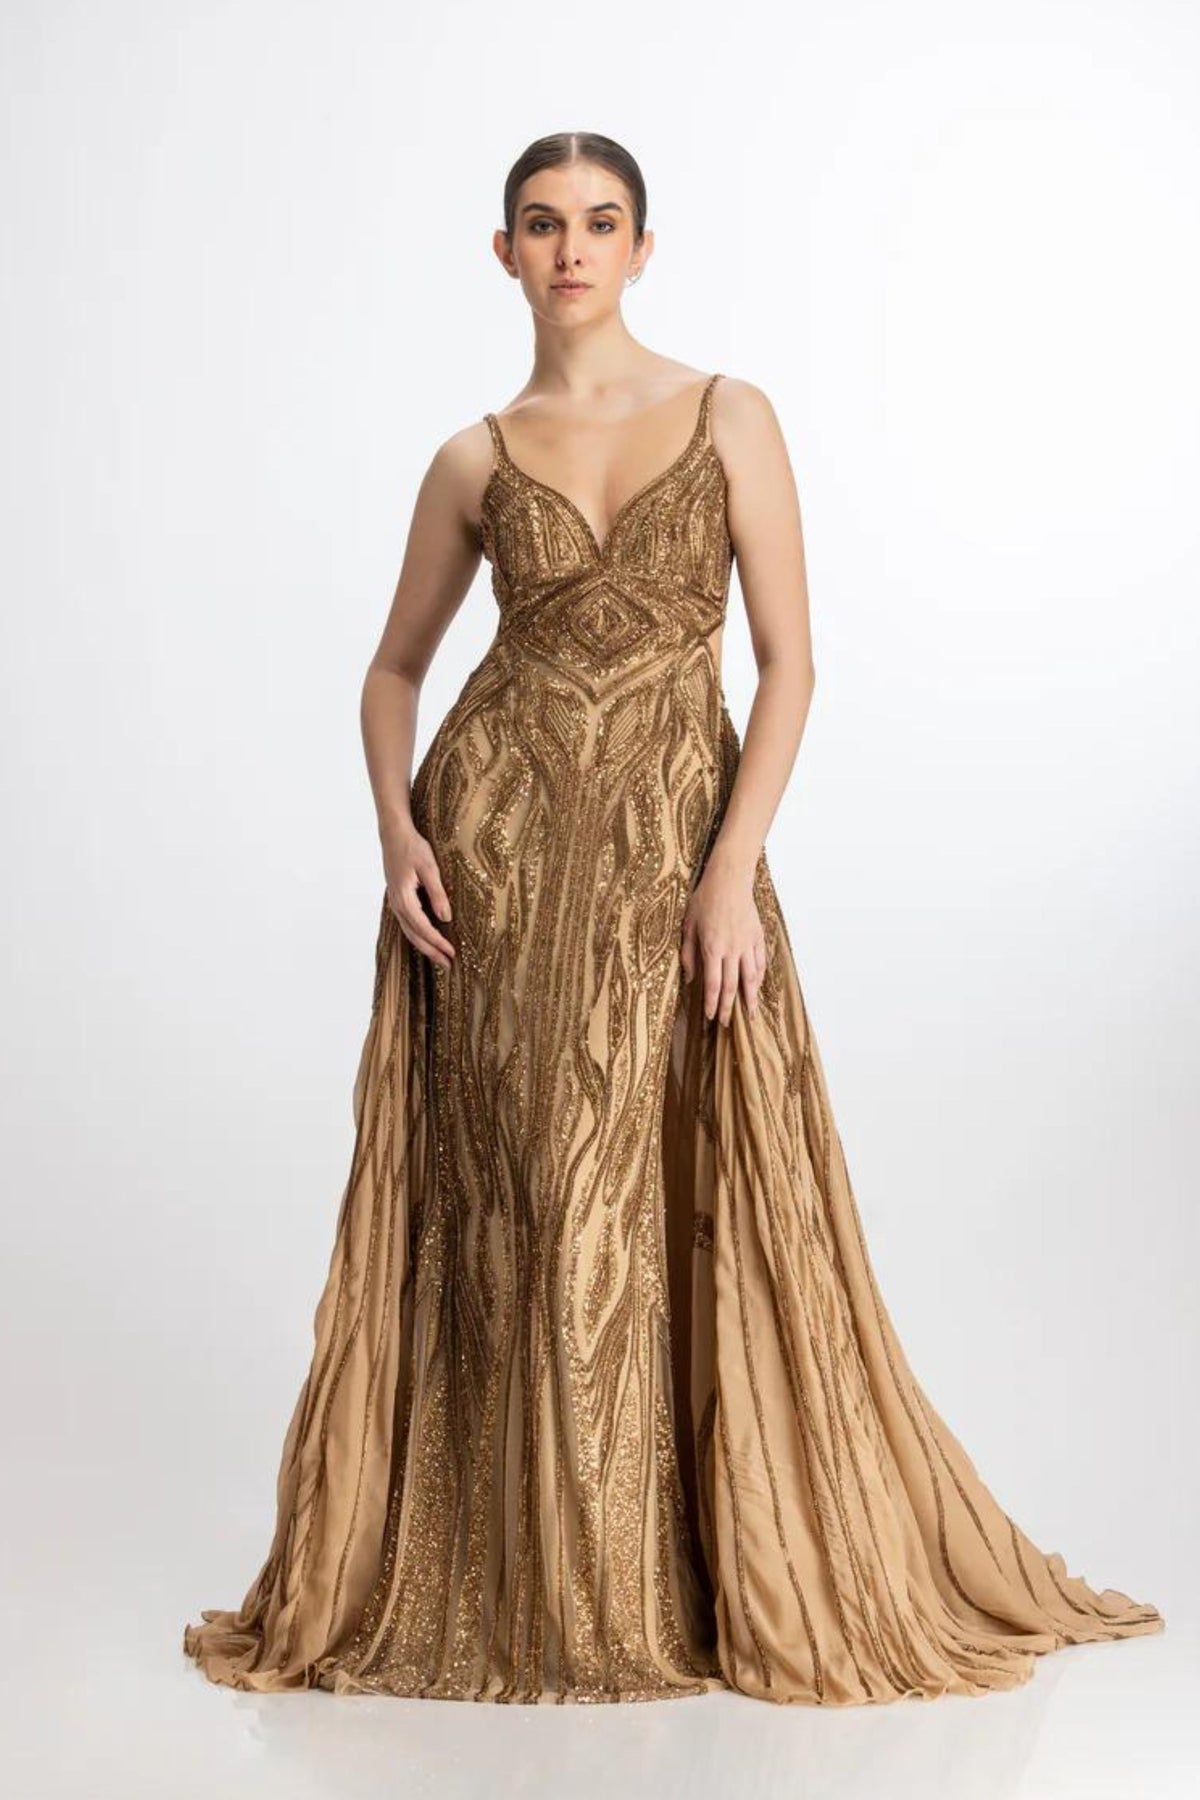 Antique gold gown with an overskirt